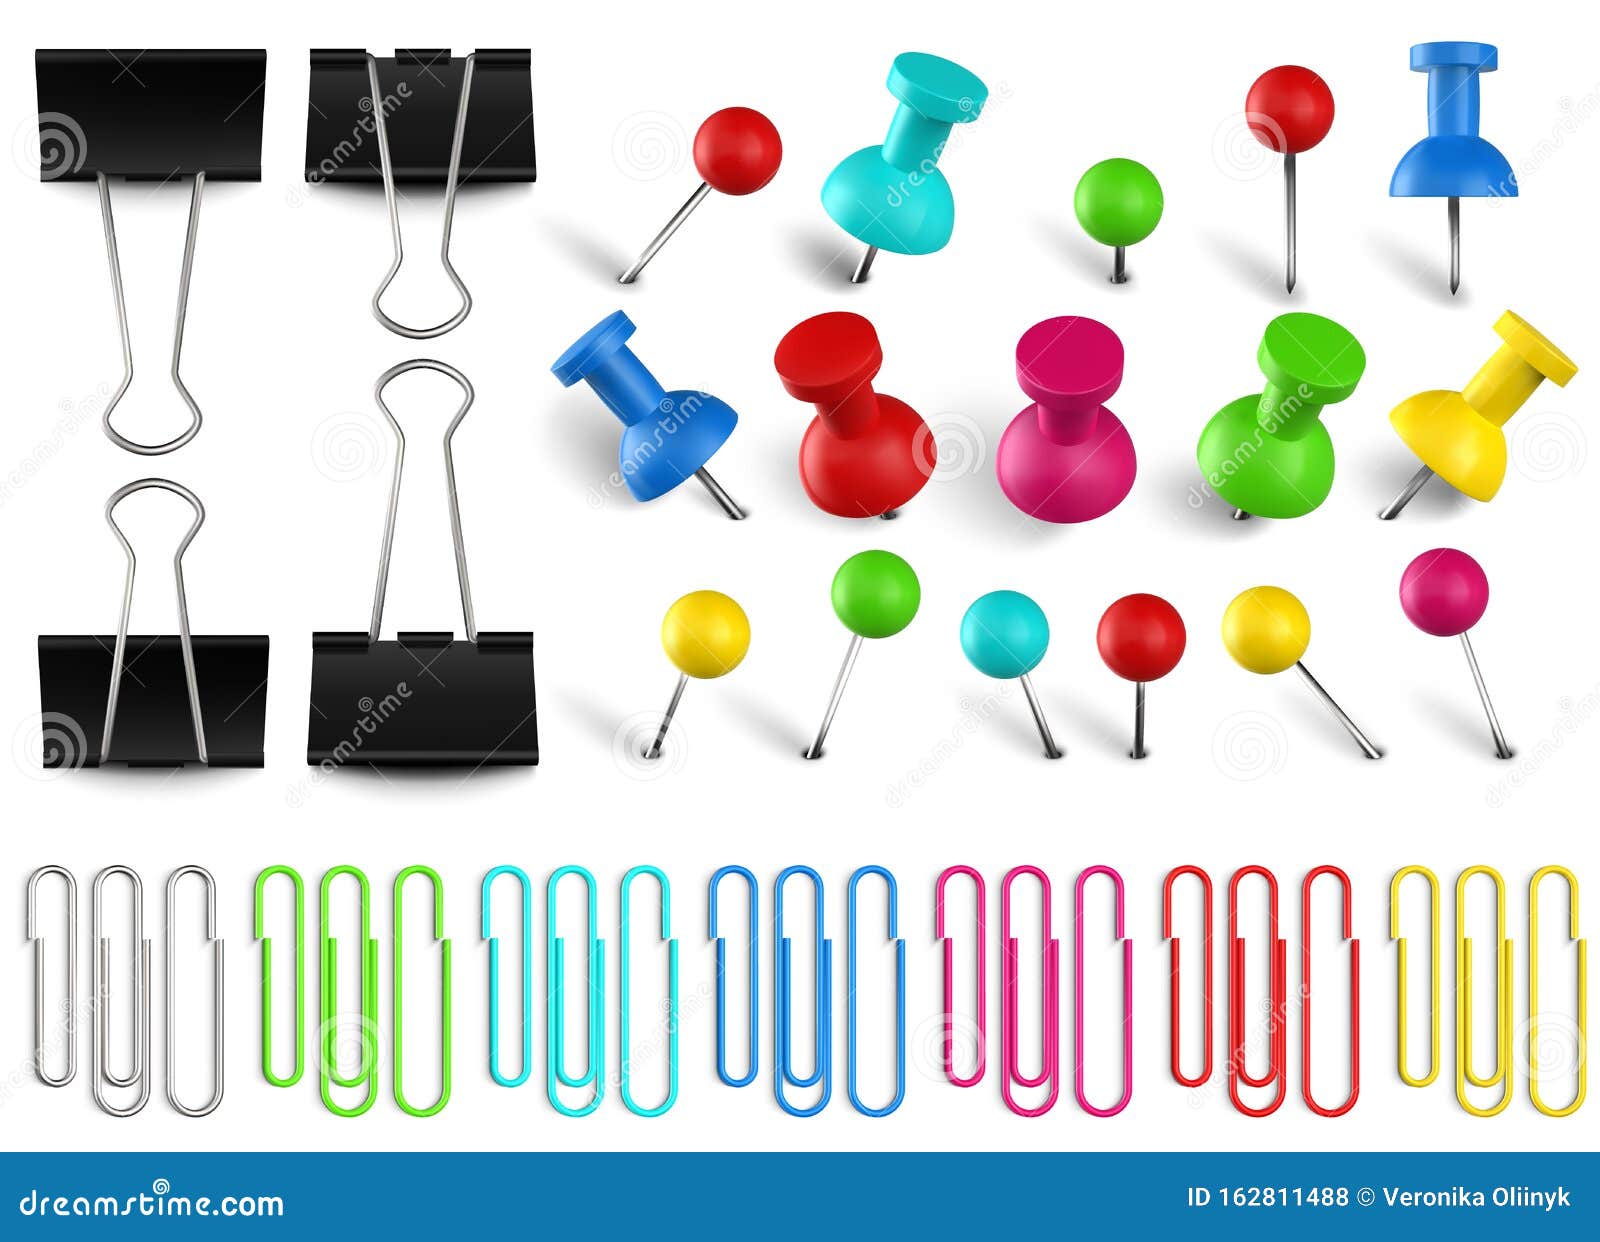 colorful pushpins and paperclips binders. color paper clip, red pushpin and office papers clamp. realistic pins 